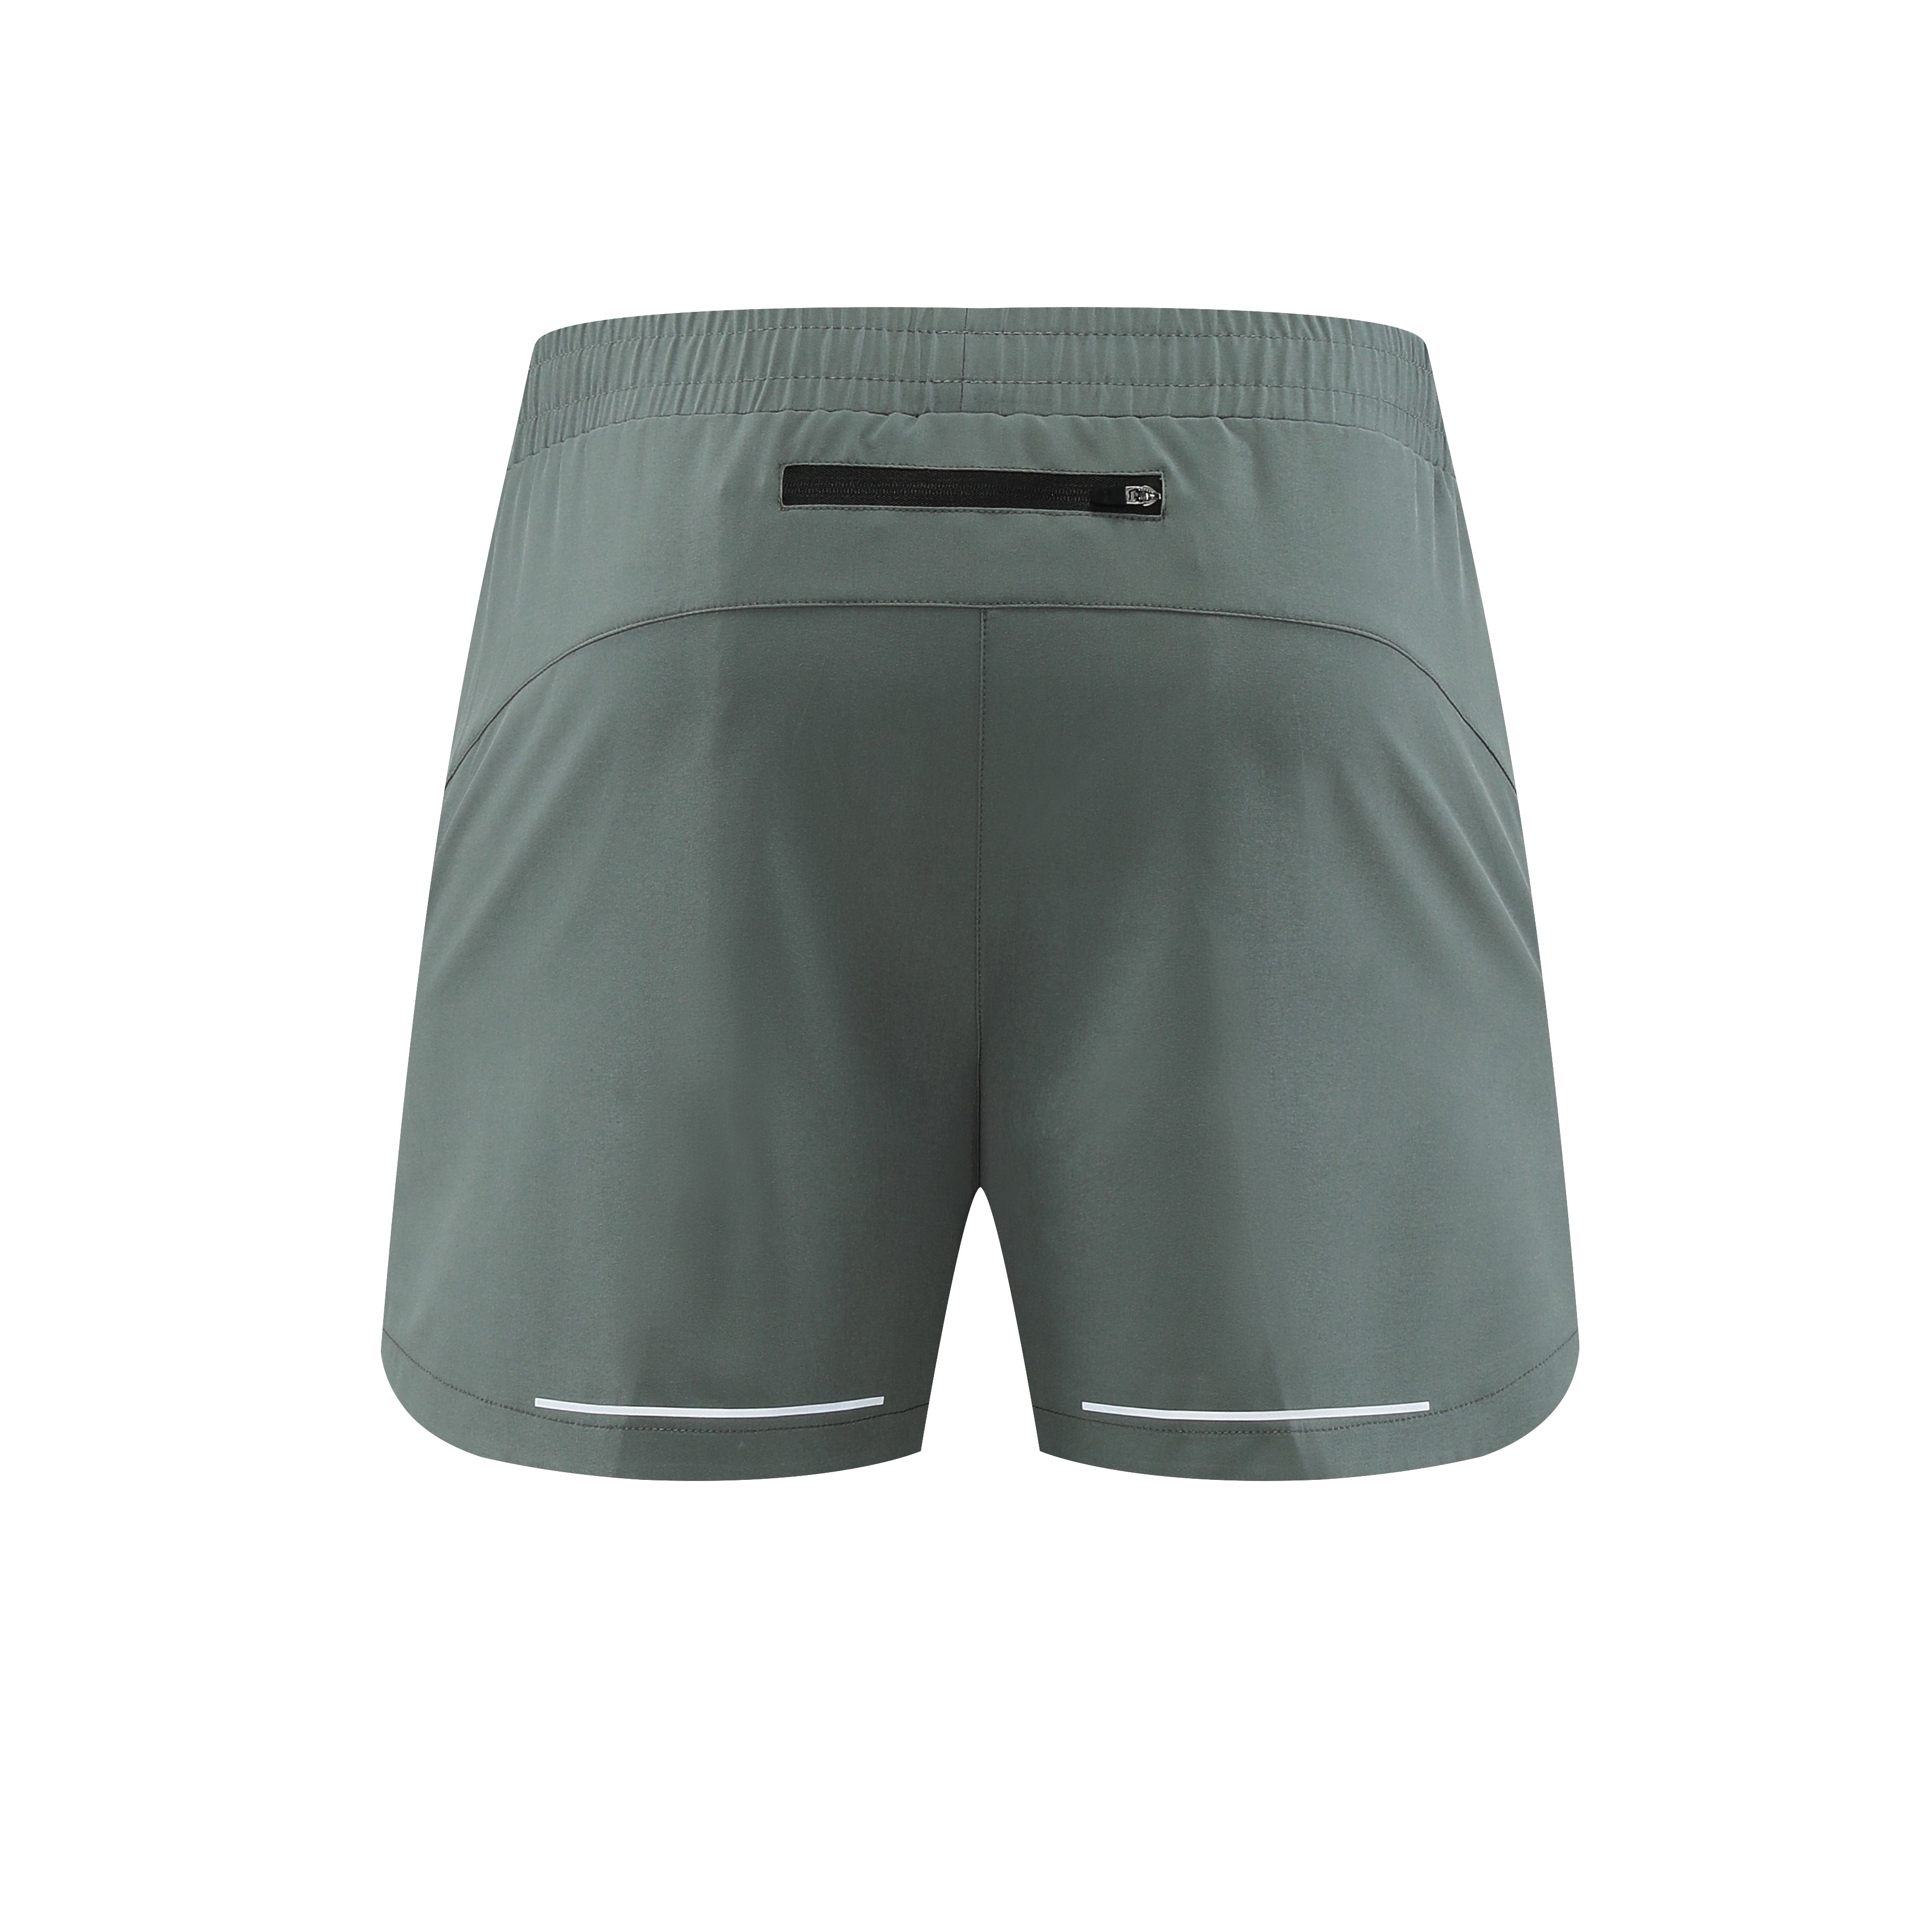 Men's Quick Dry Live And Love Graphic Shorts